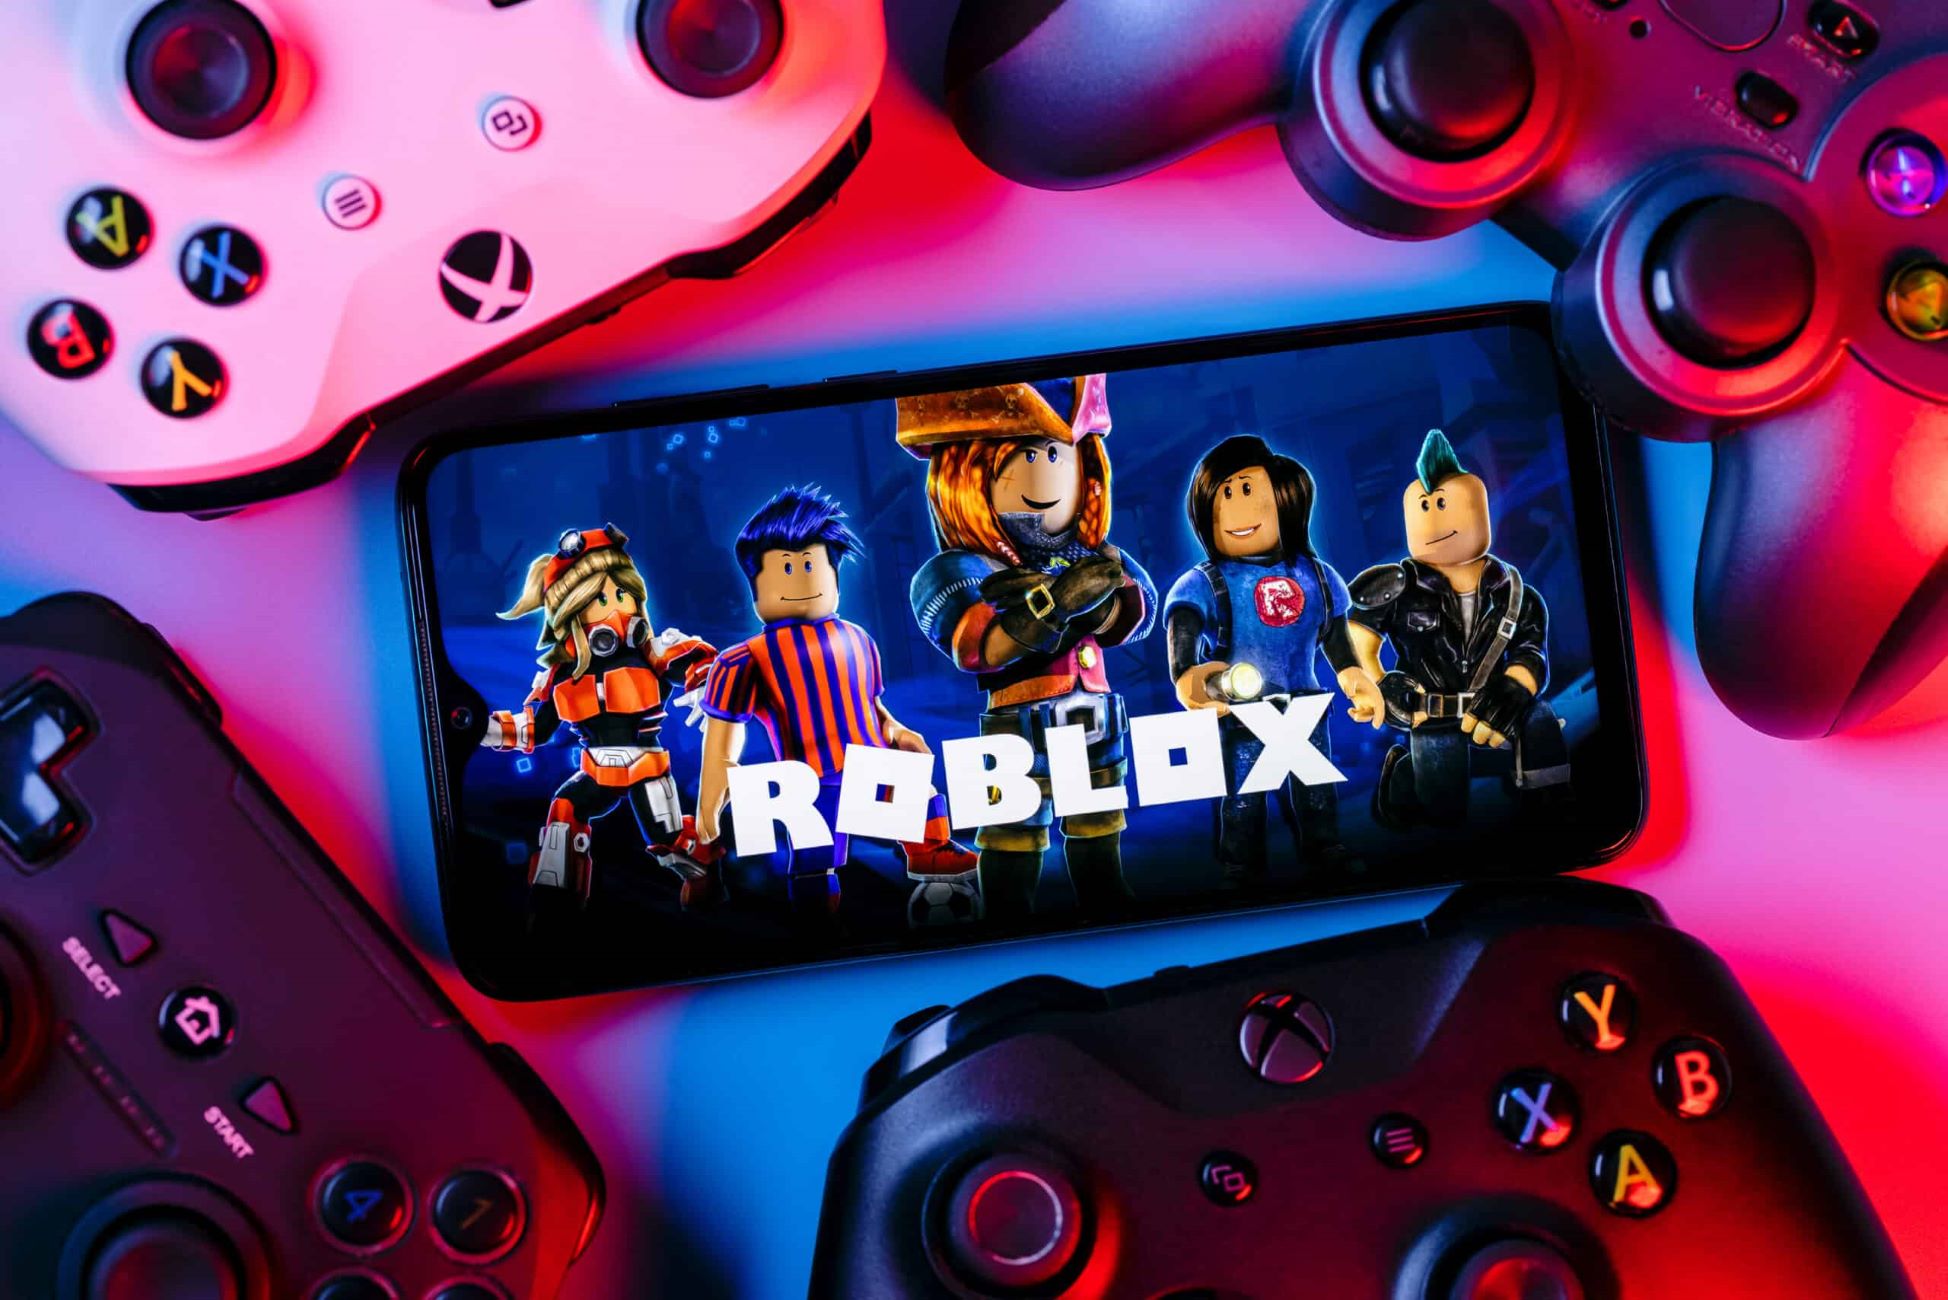 Roblox Gamepad Controls: Step-by-Step Guide